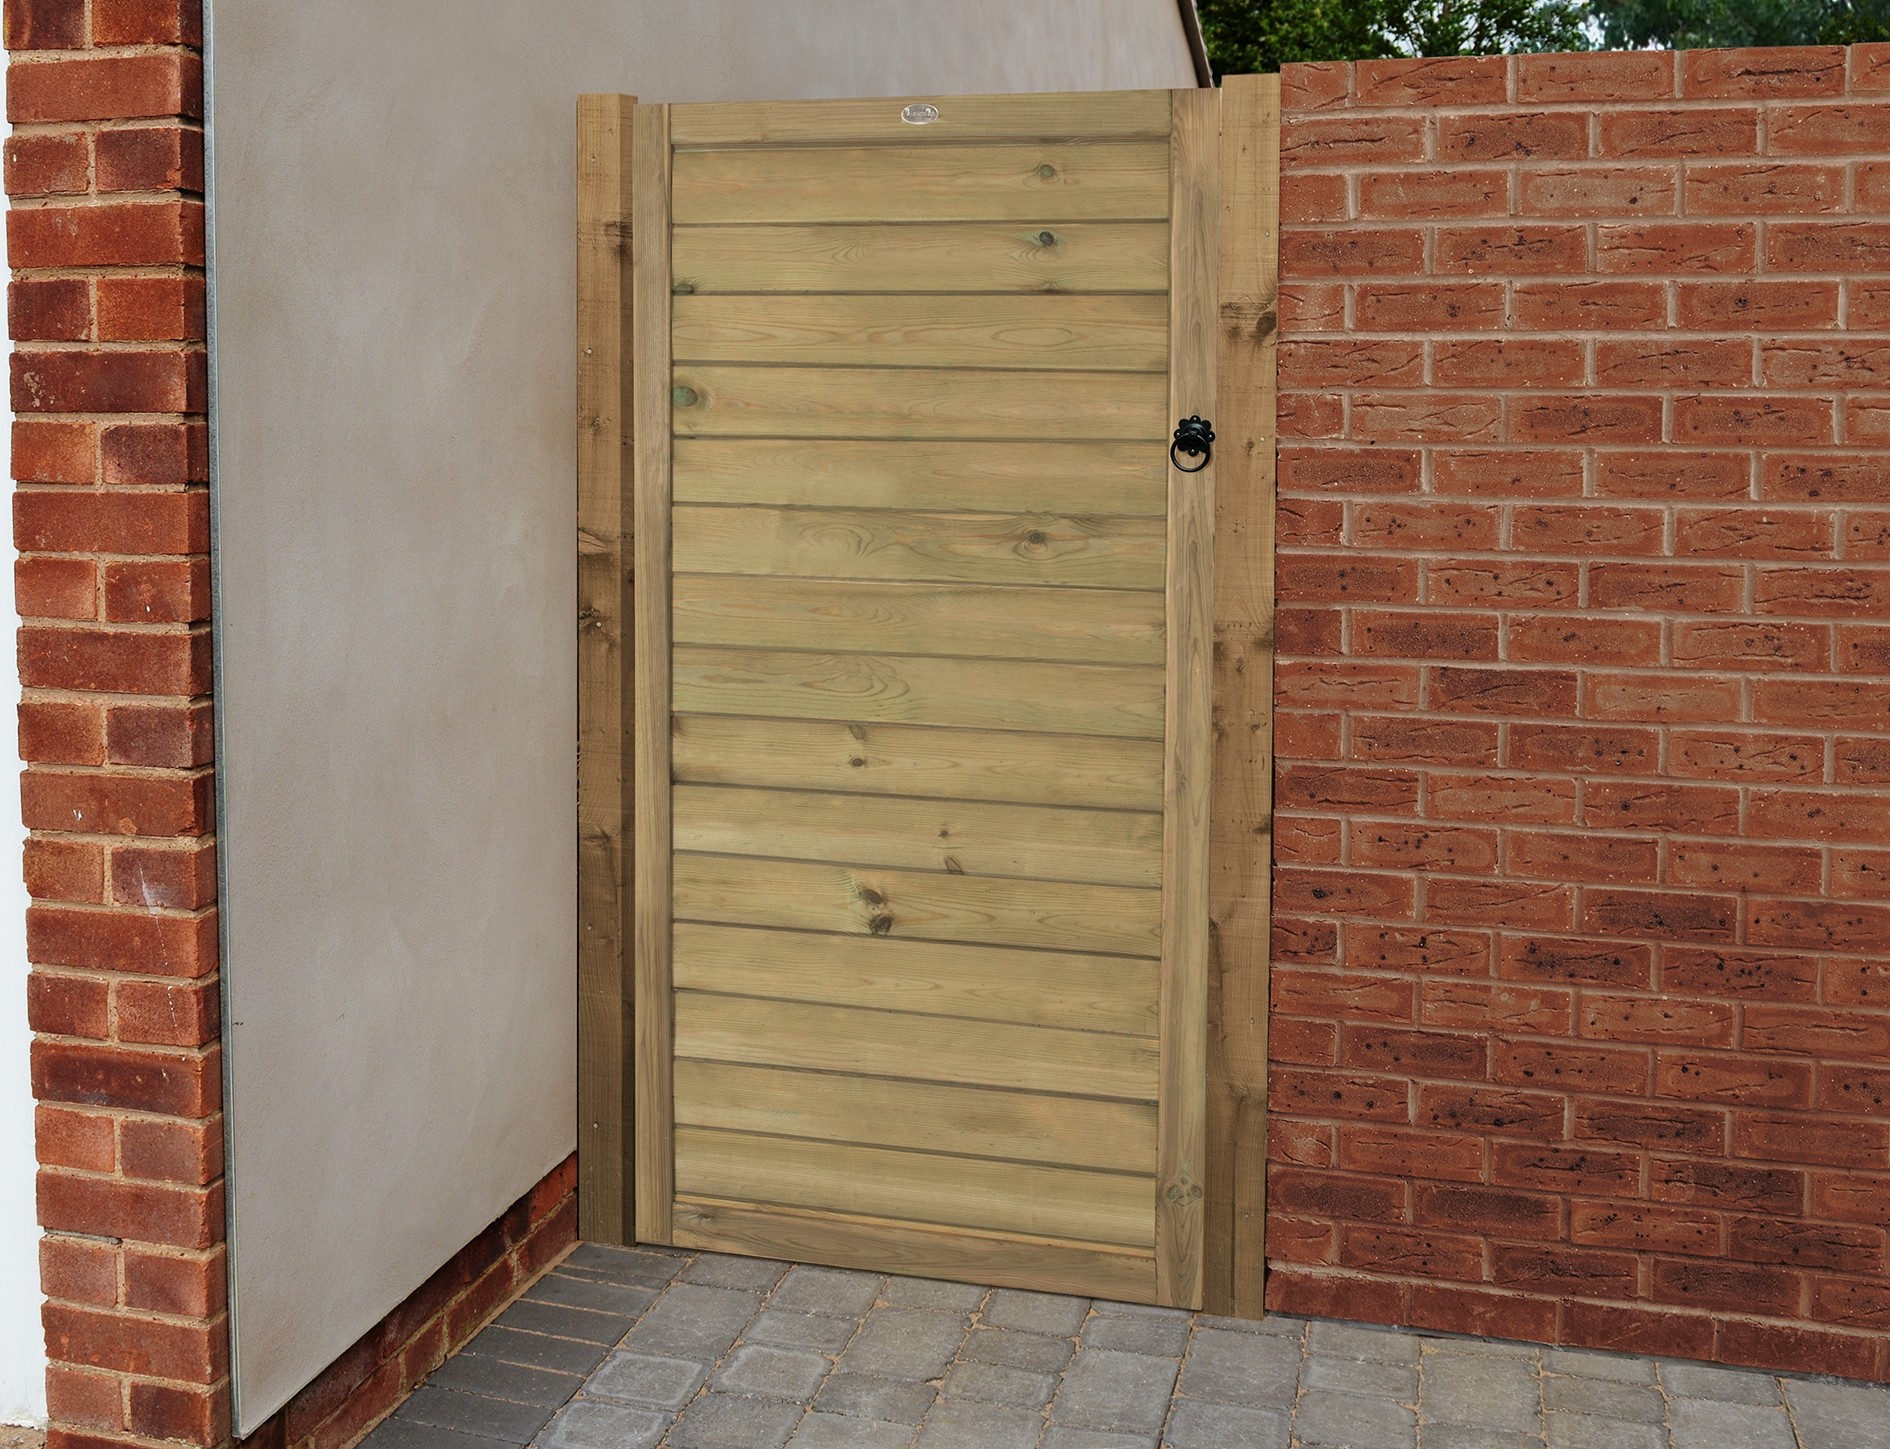 Tongue and groove gate (Horizontal) 1.8m x 900mm